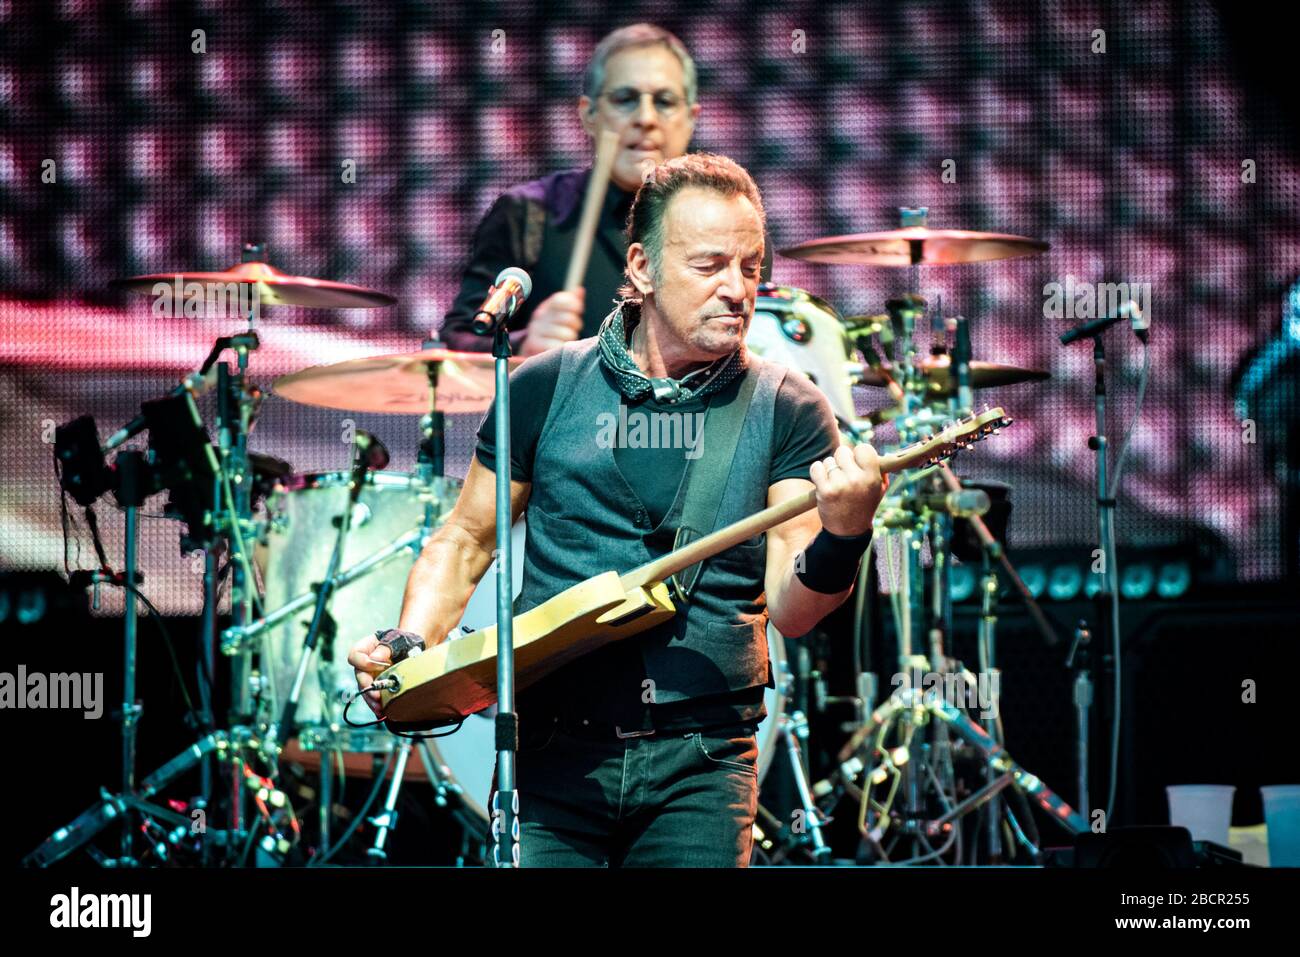 The American singer and composer Bruce Springsteen, together with the E-Street band, playing for the “The River tour” at the San Siro Stadium in Milan Stock Photo